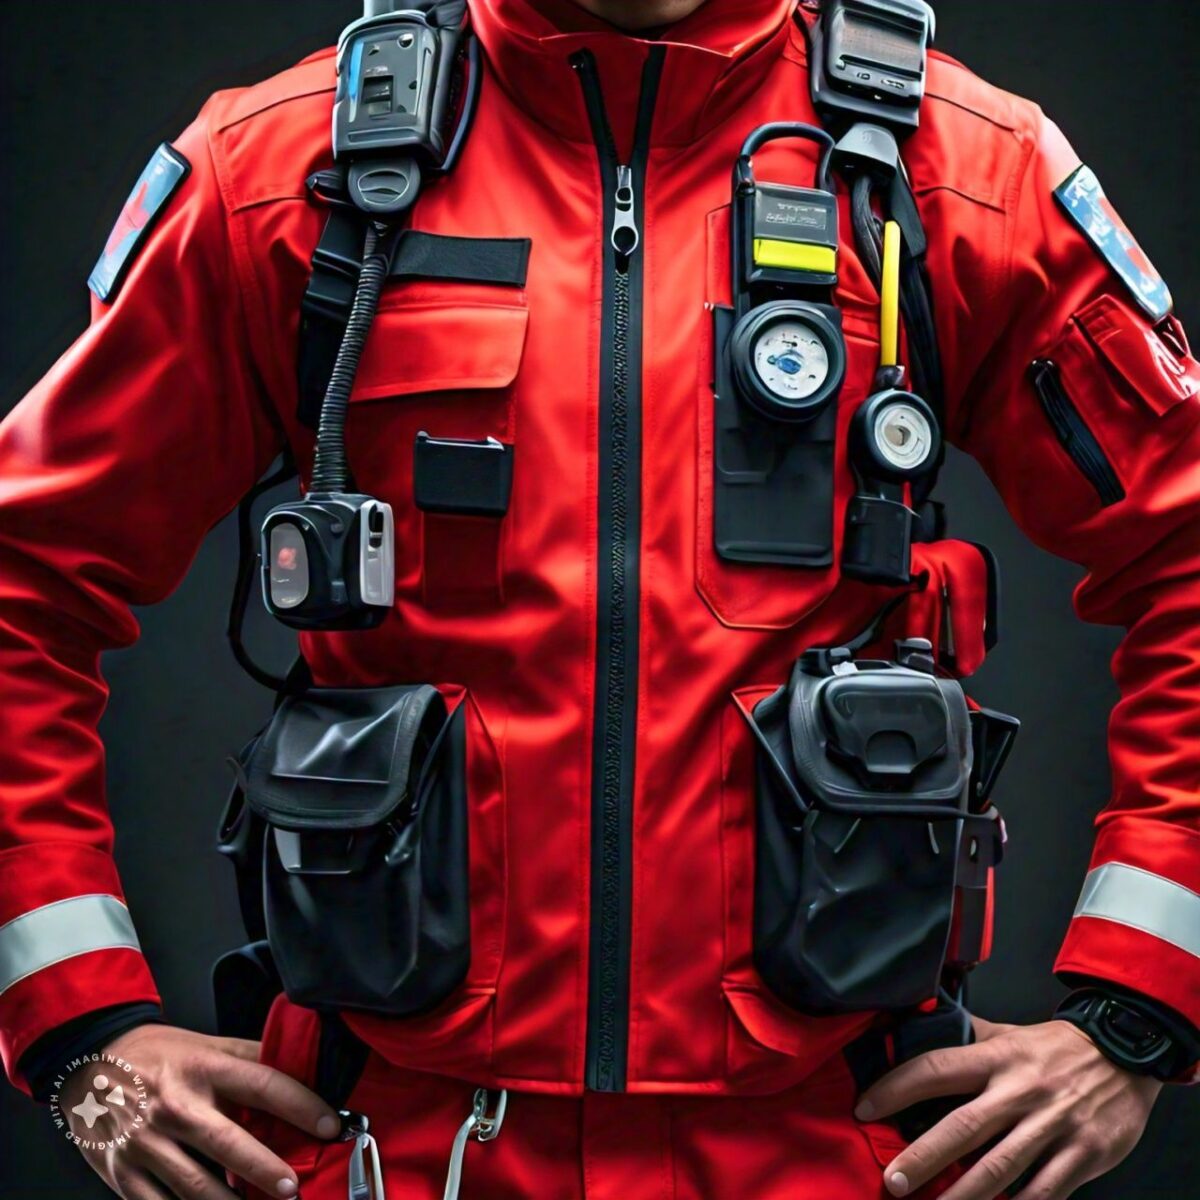 Elevate Your Training with the EMS Training Suit